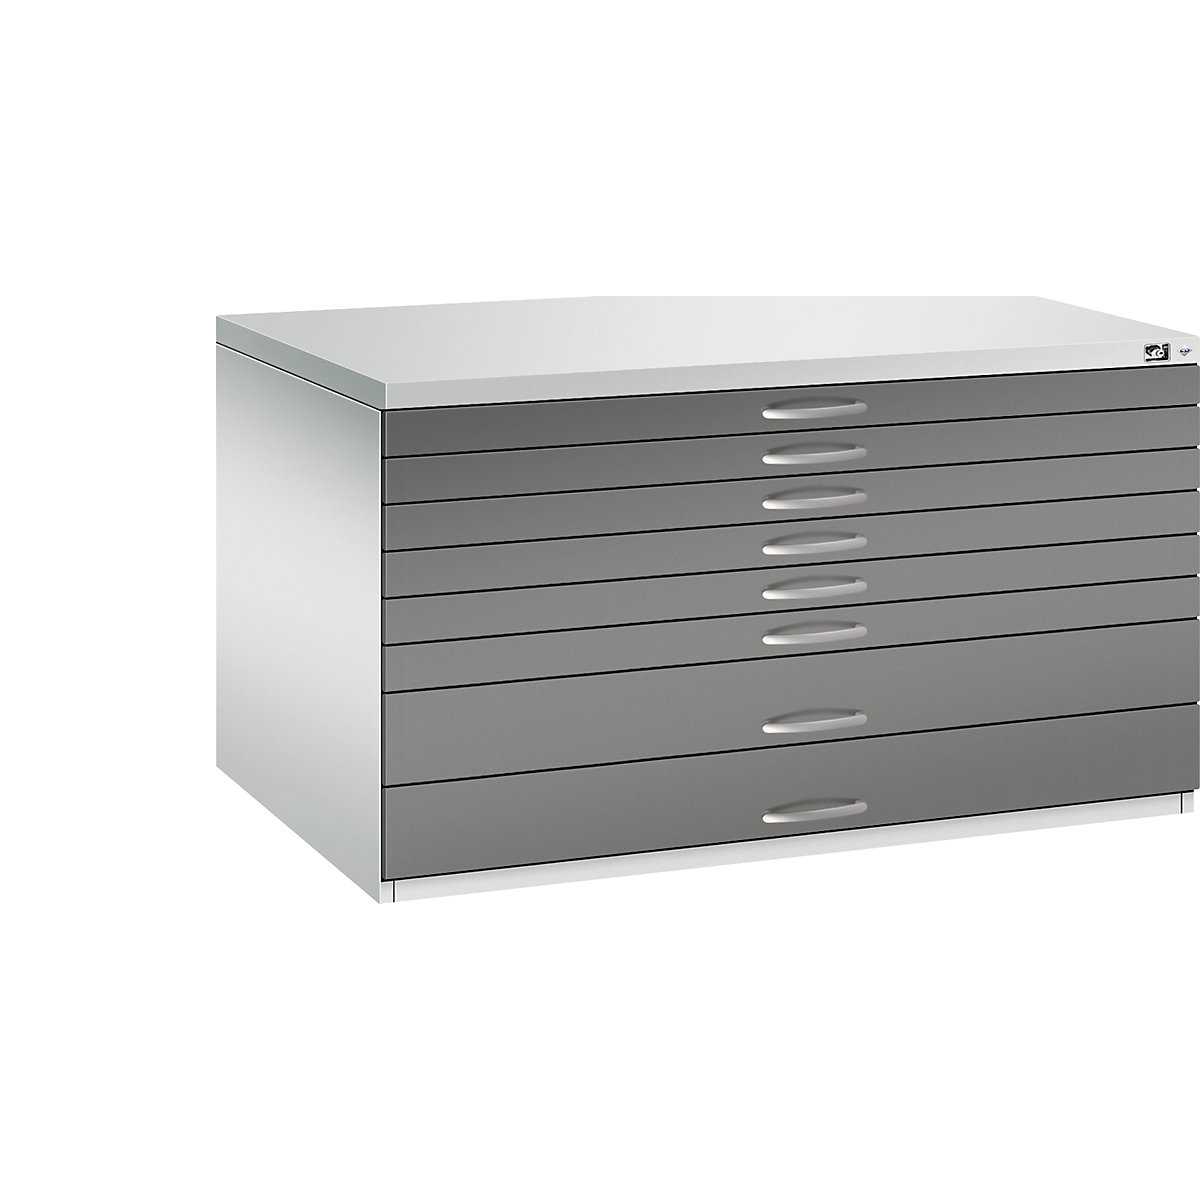 Drawing cabinet – C+P, A0, 8 drawers, height 760 mm, light grey / volcanic grey-10